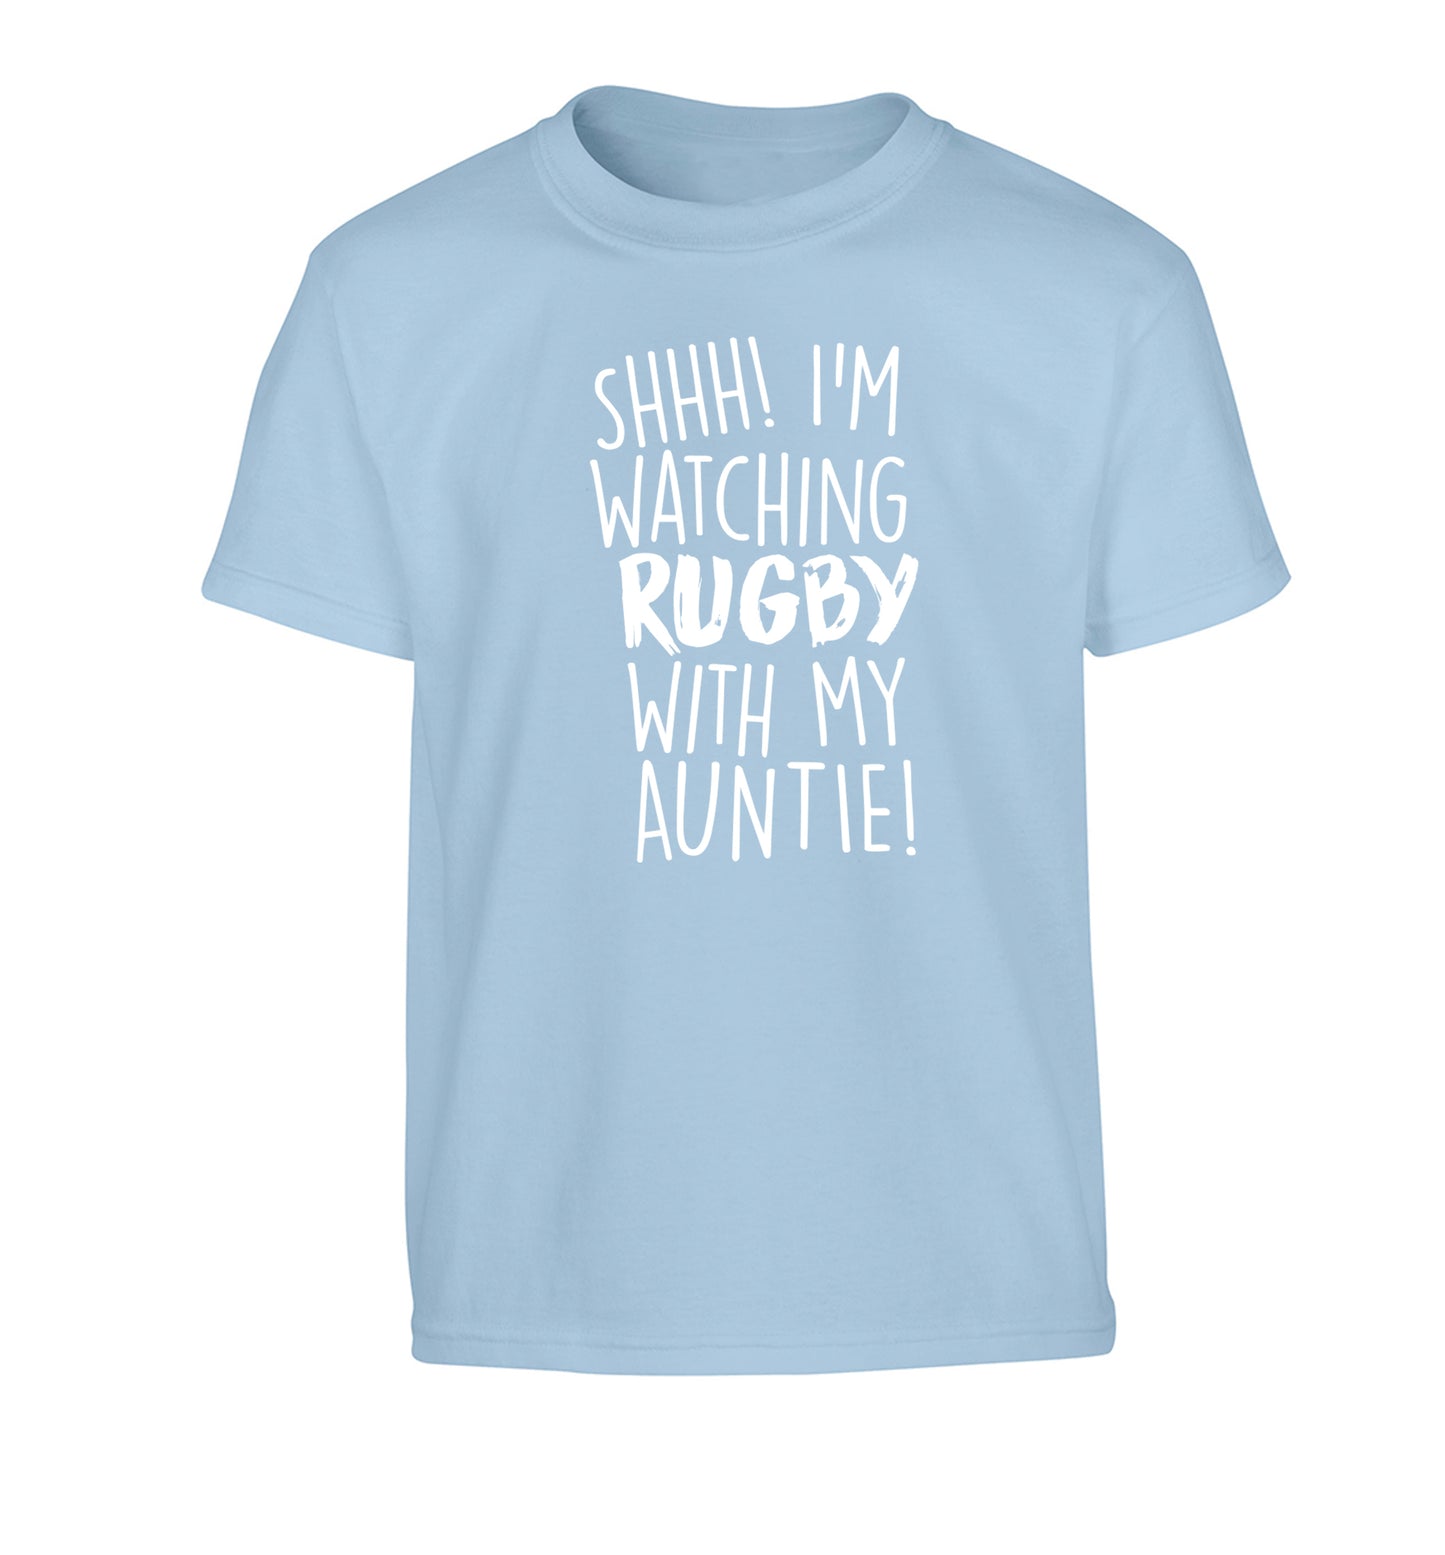 Shhh I'm watchin rugby with my auntie Children's light blue Tshirt 12-13 Years